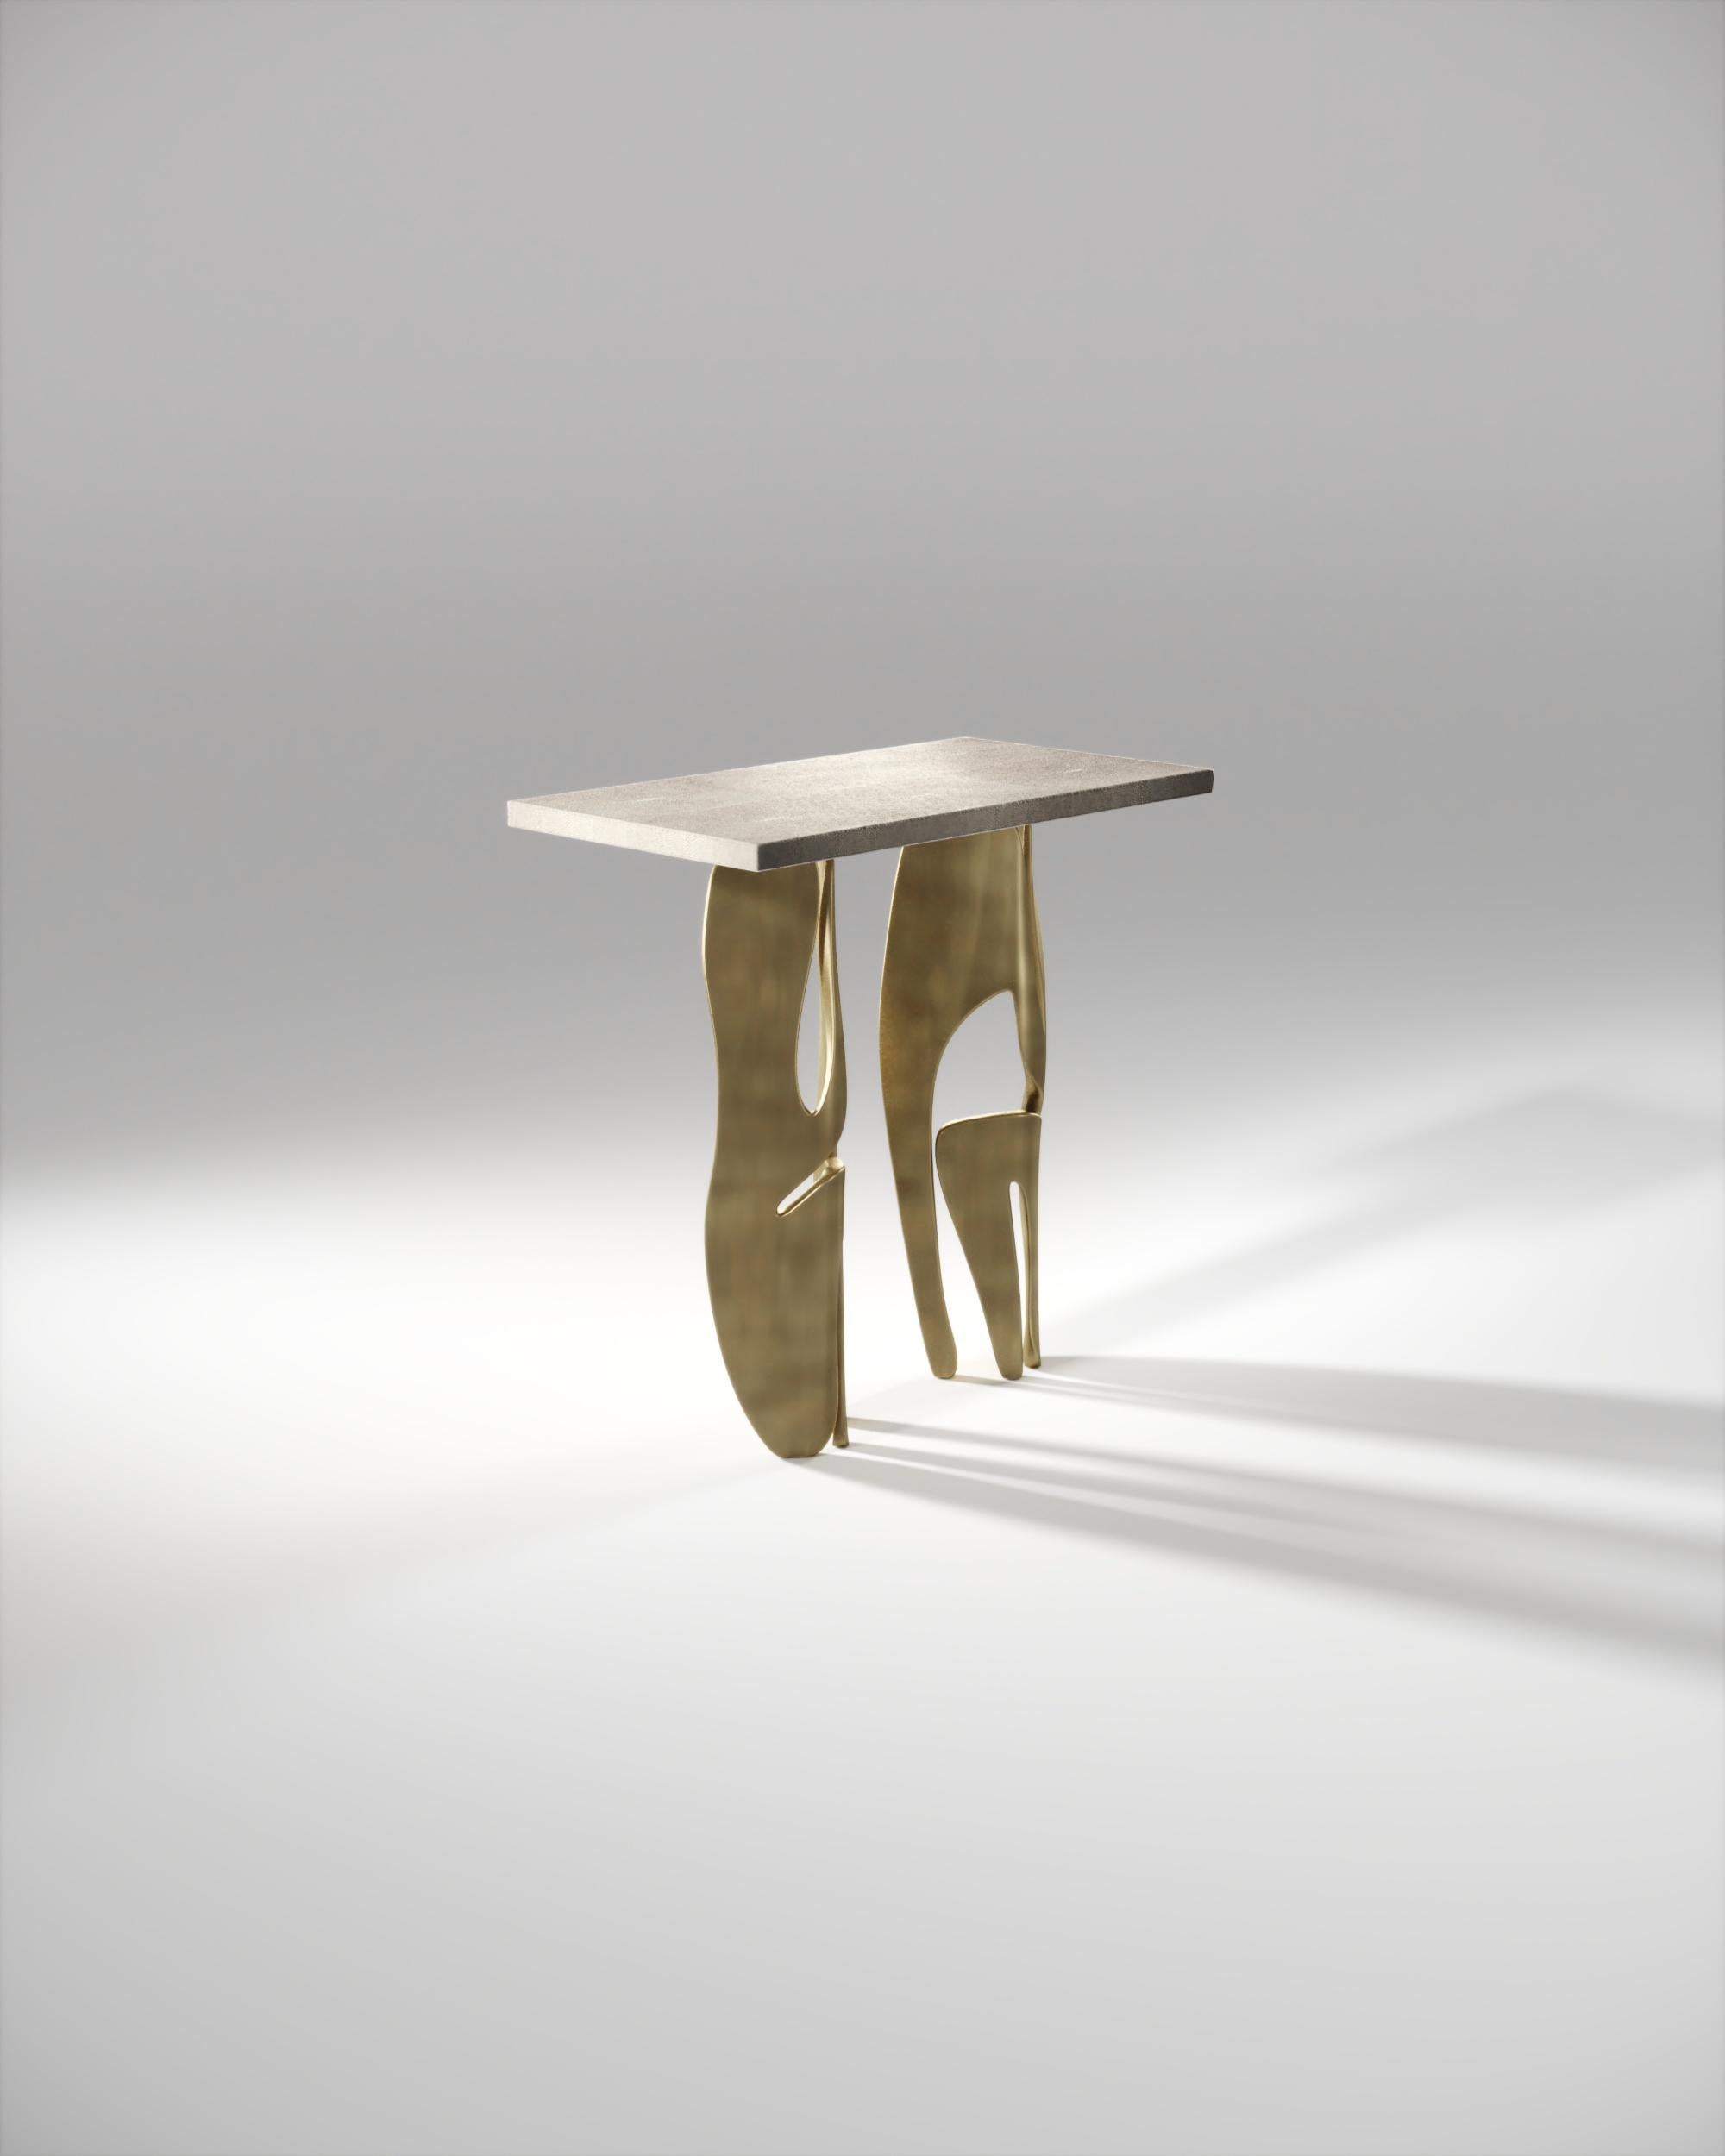 The metropolis rectangle side table by R&Y Augousti is both dramatic and organic it’s unique design. The cream shagreen inlaid top sits on a pair of ethereal and sculptural bronze-patina brass legs. This piece makes for the perfect end table and is